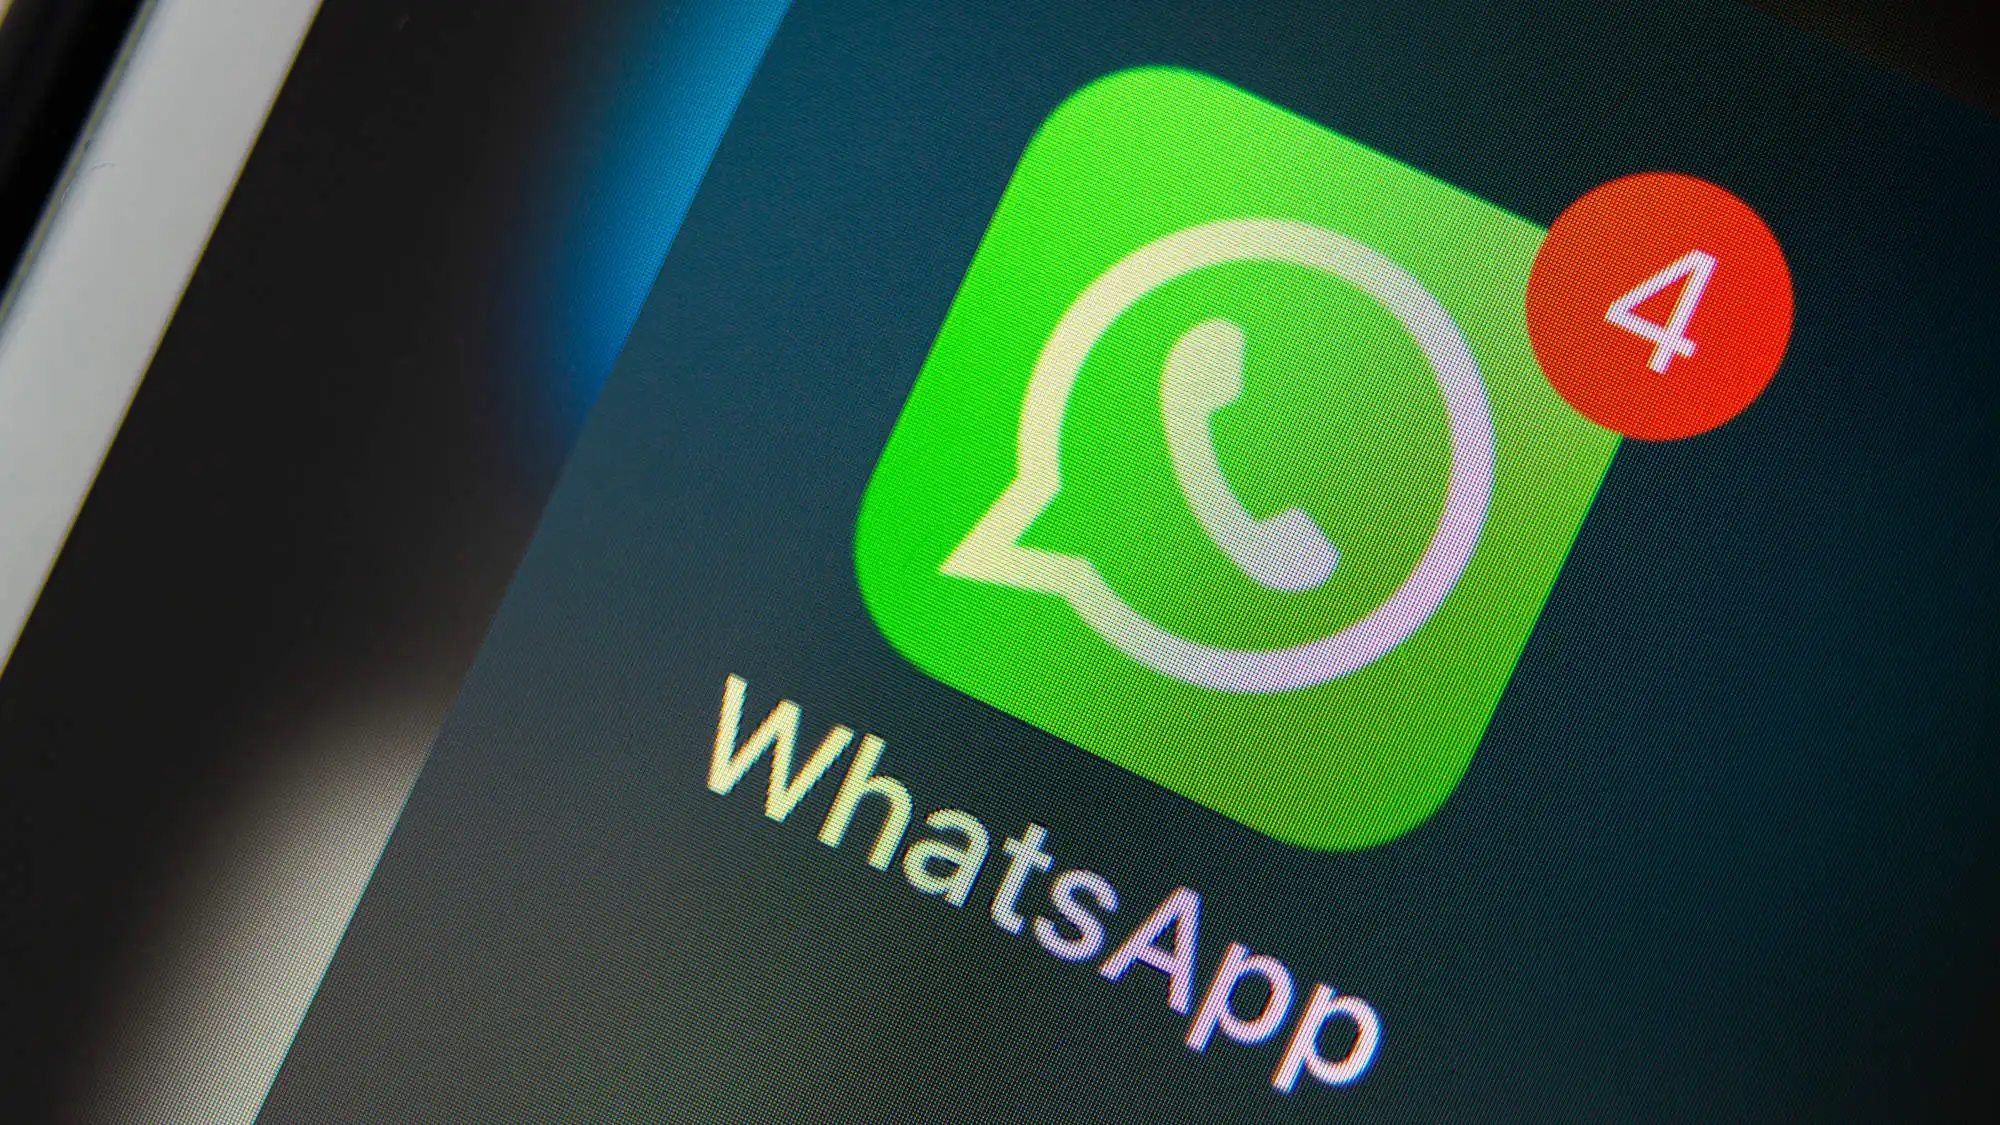 WhatsApp: Future updates will add contact notes and favourites management